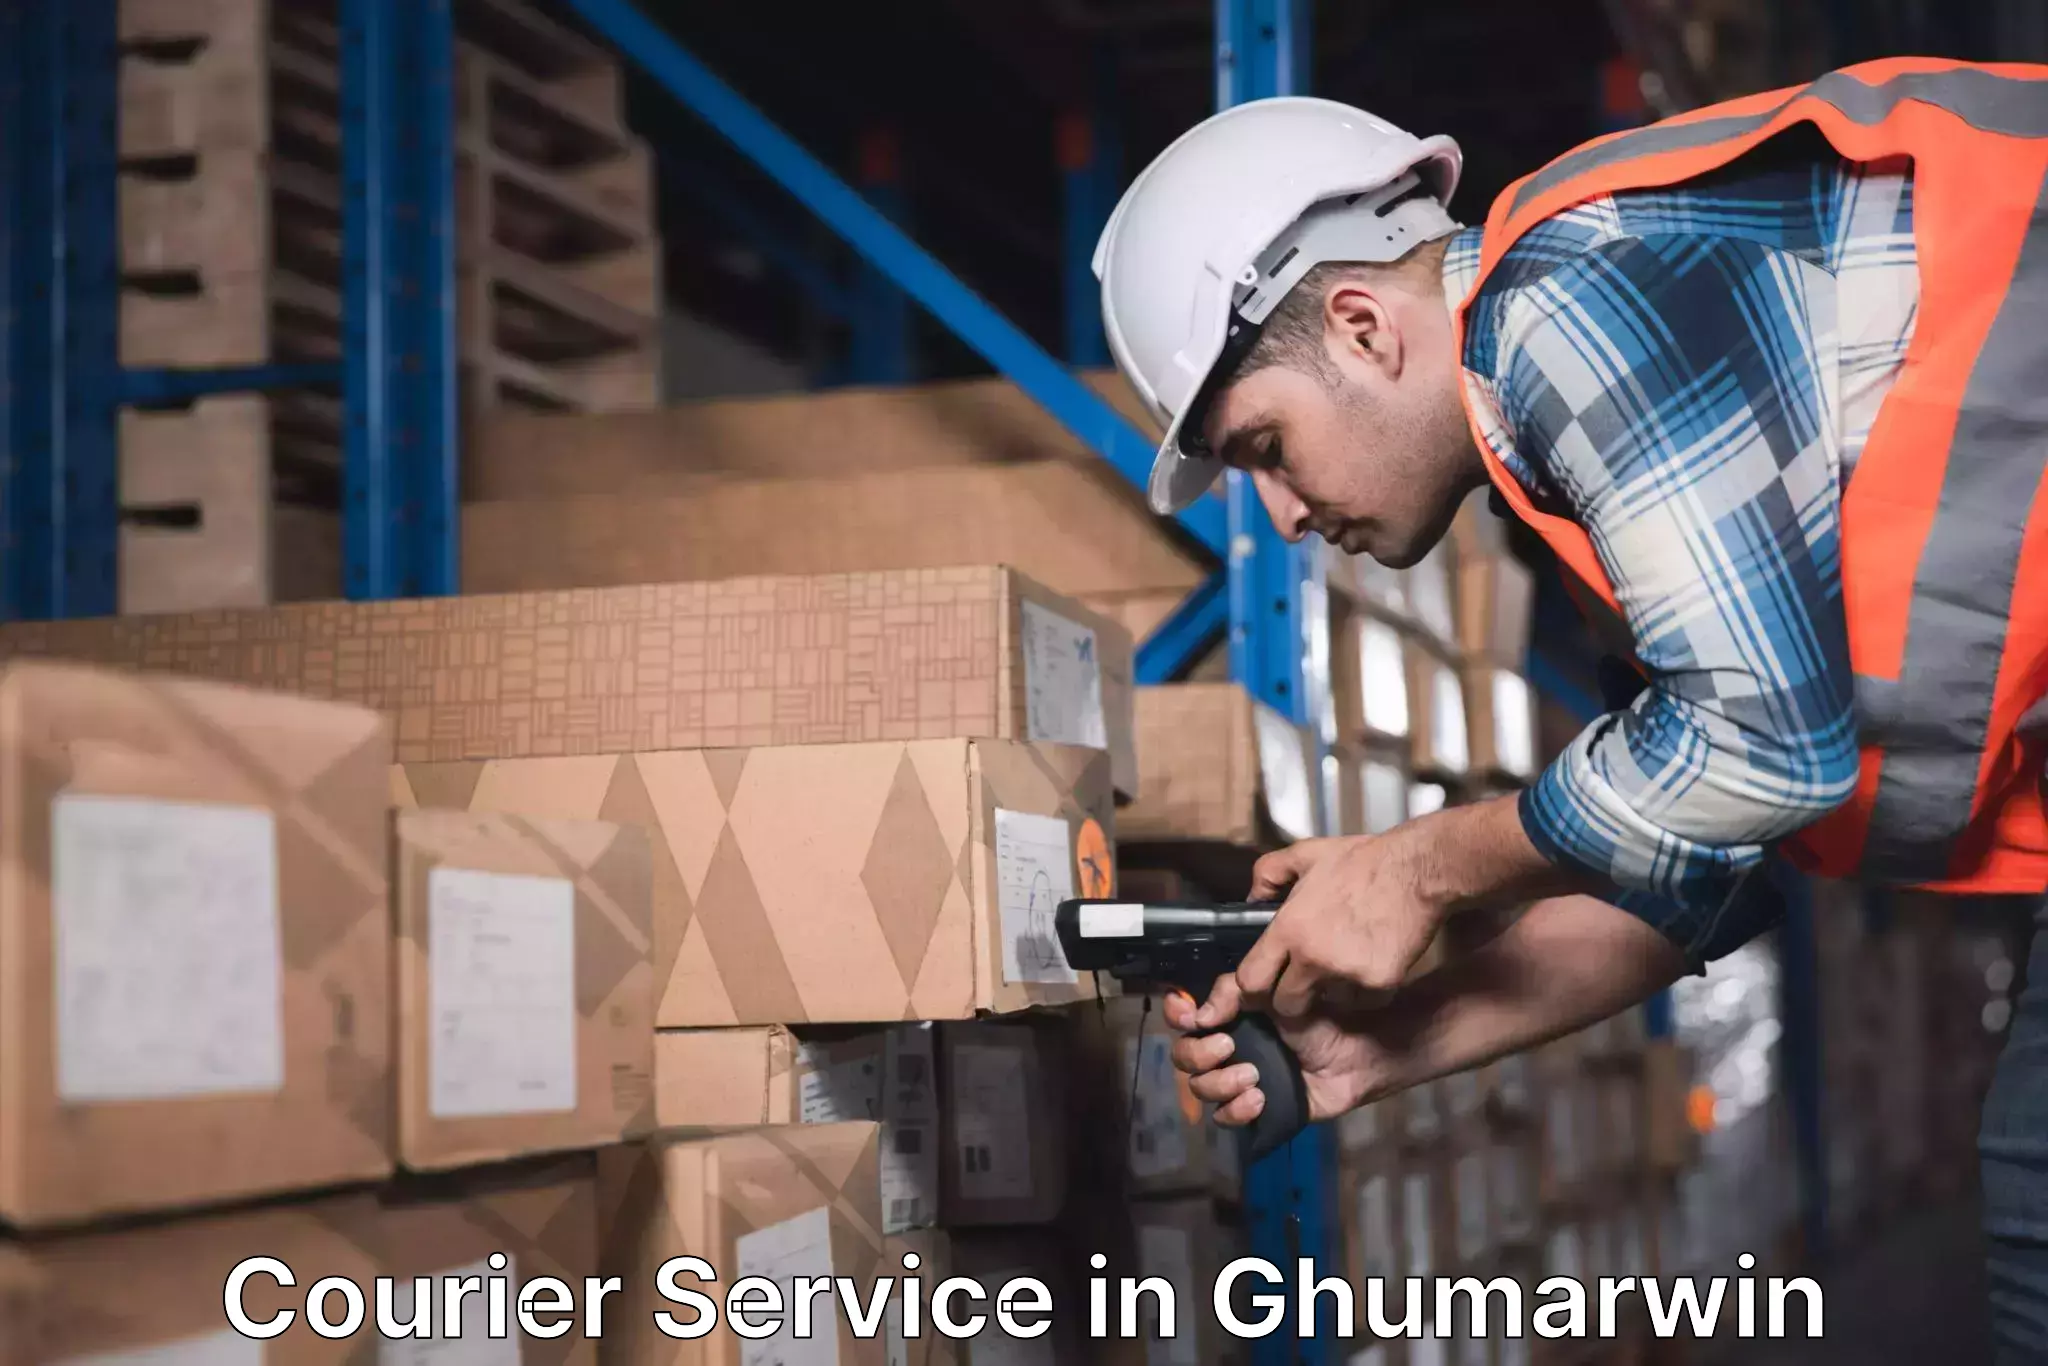 Express delivery solutions in Ghumarwin